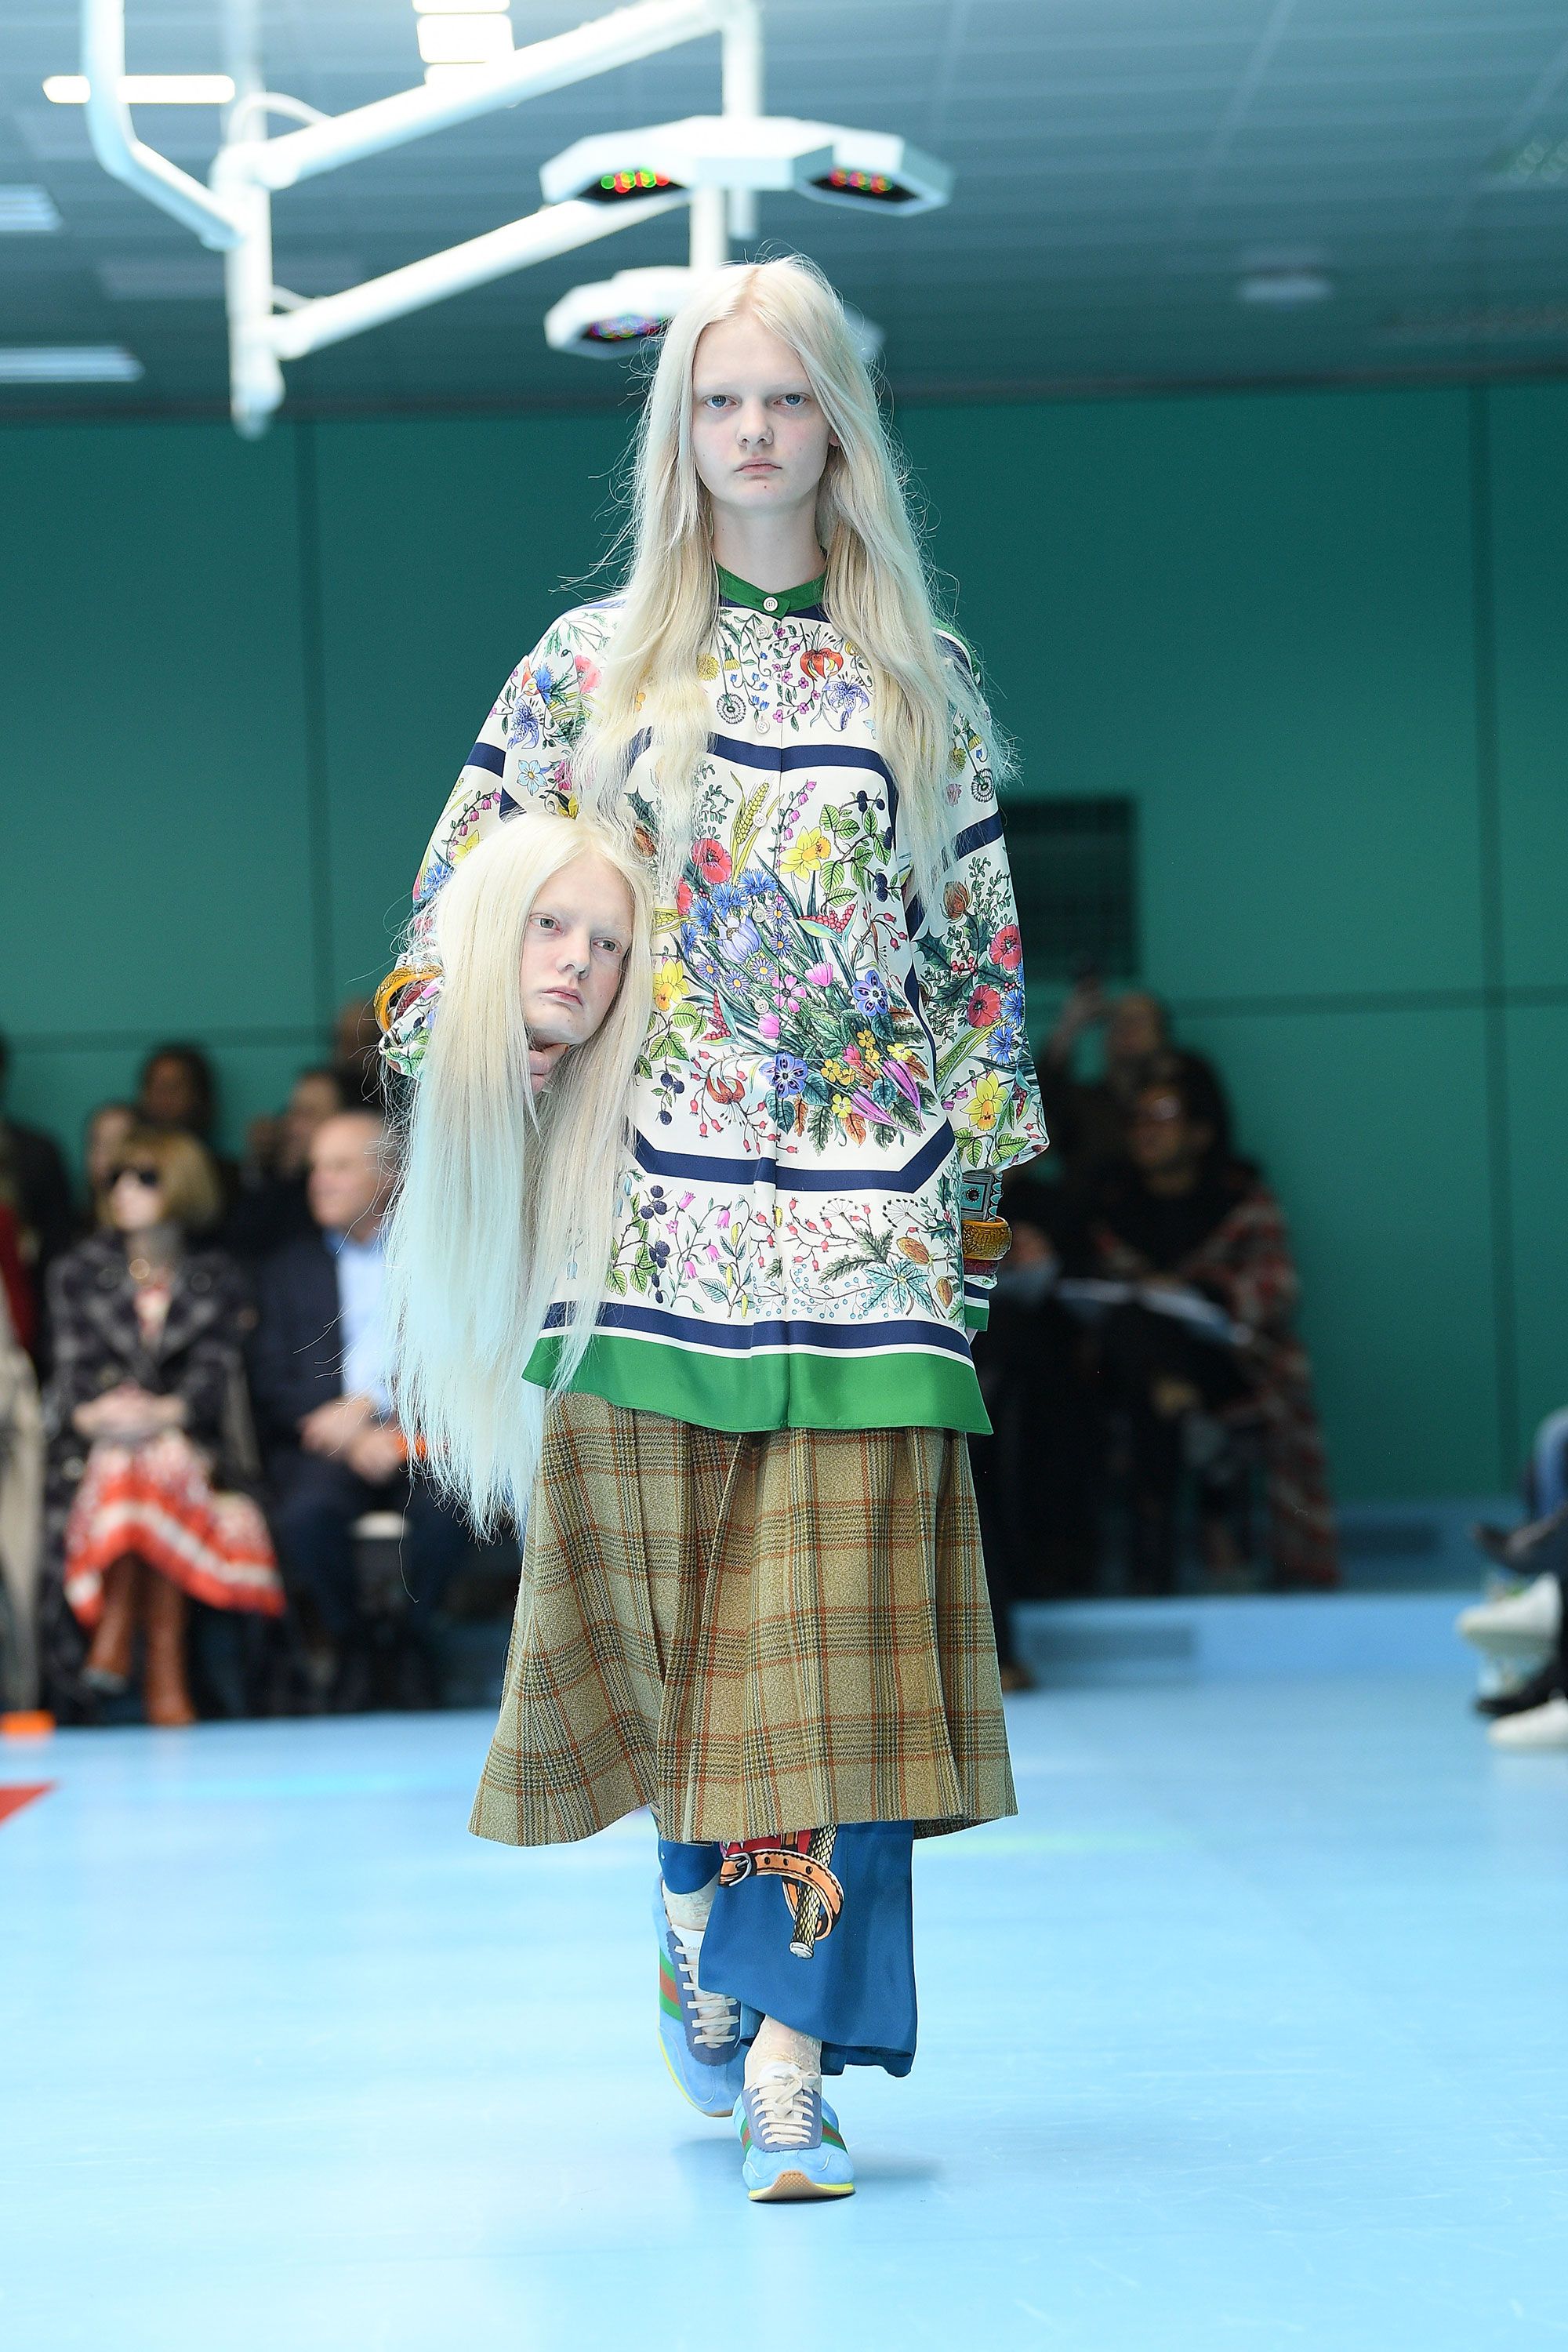 Gucci show carrying severed heads